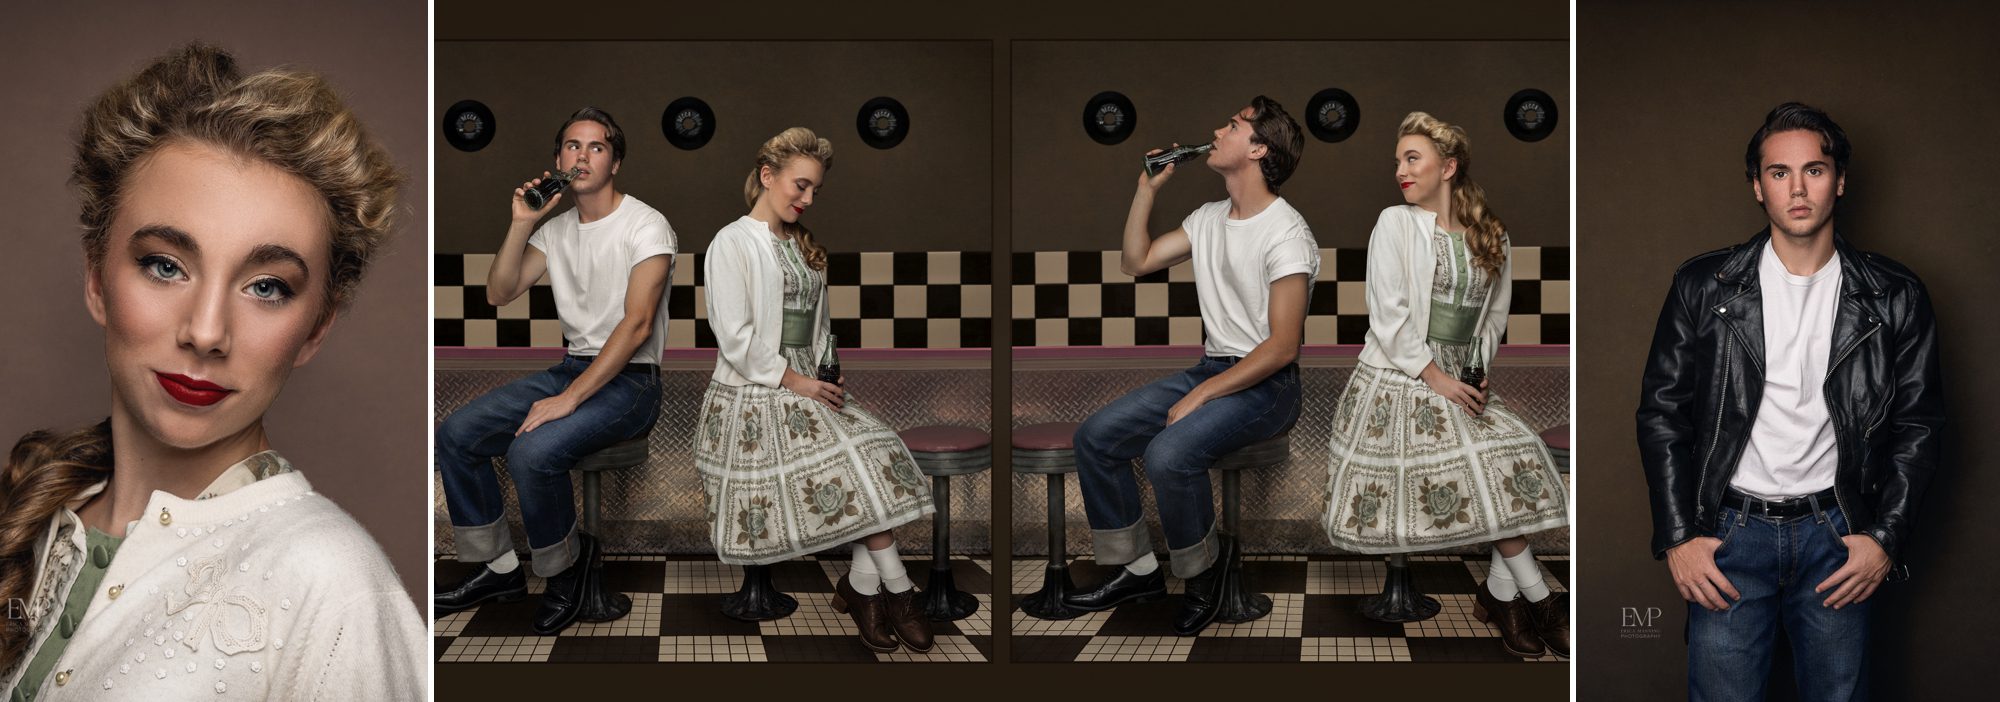 Vintage fifties scene with boy and girl  at diner